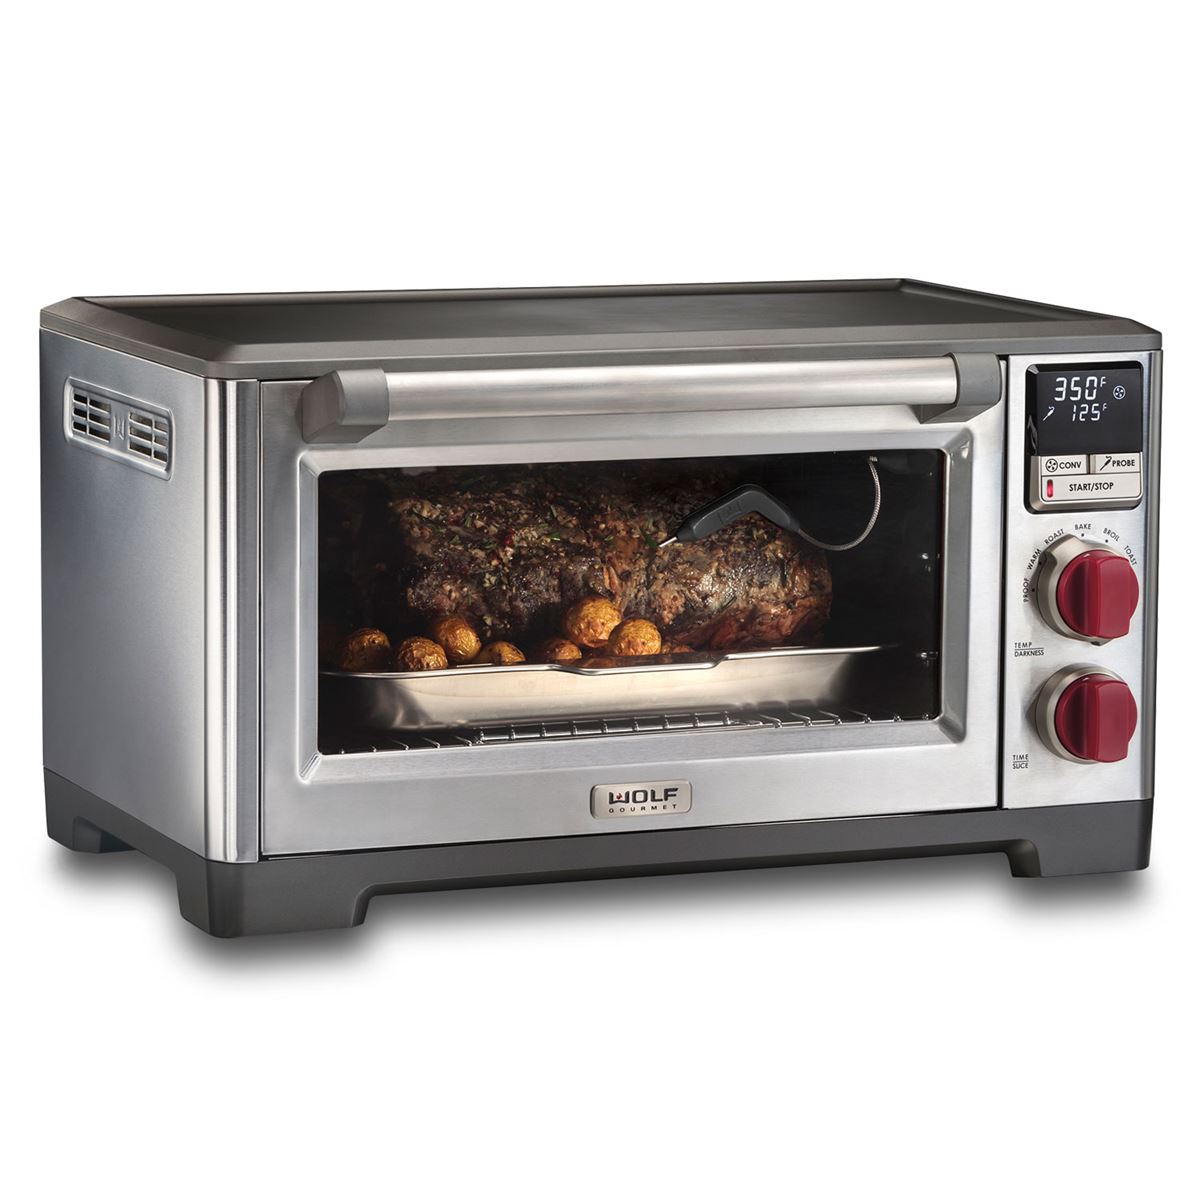 Best Convection Toaster Oven 2022